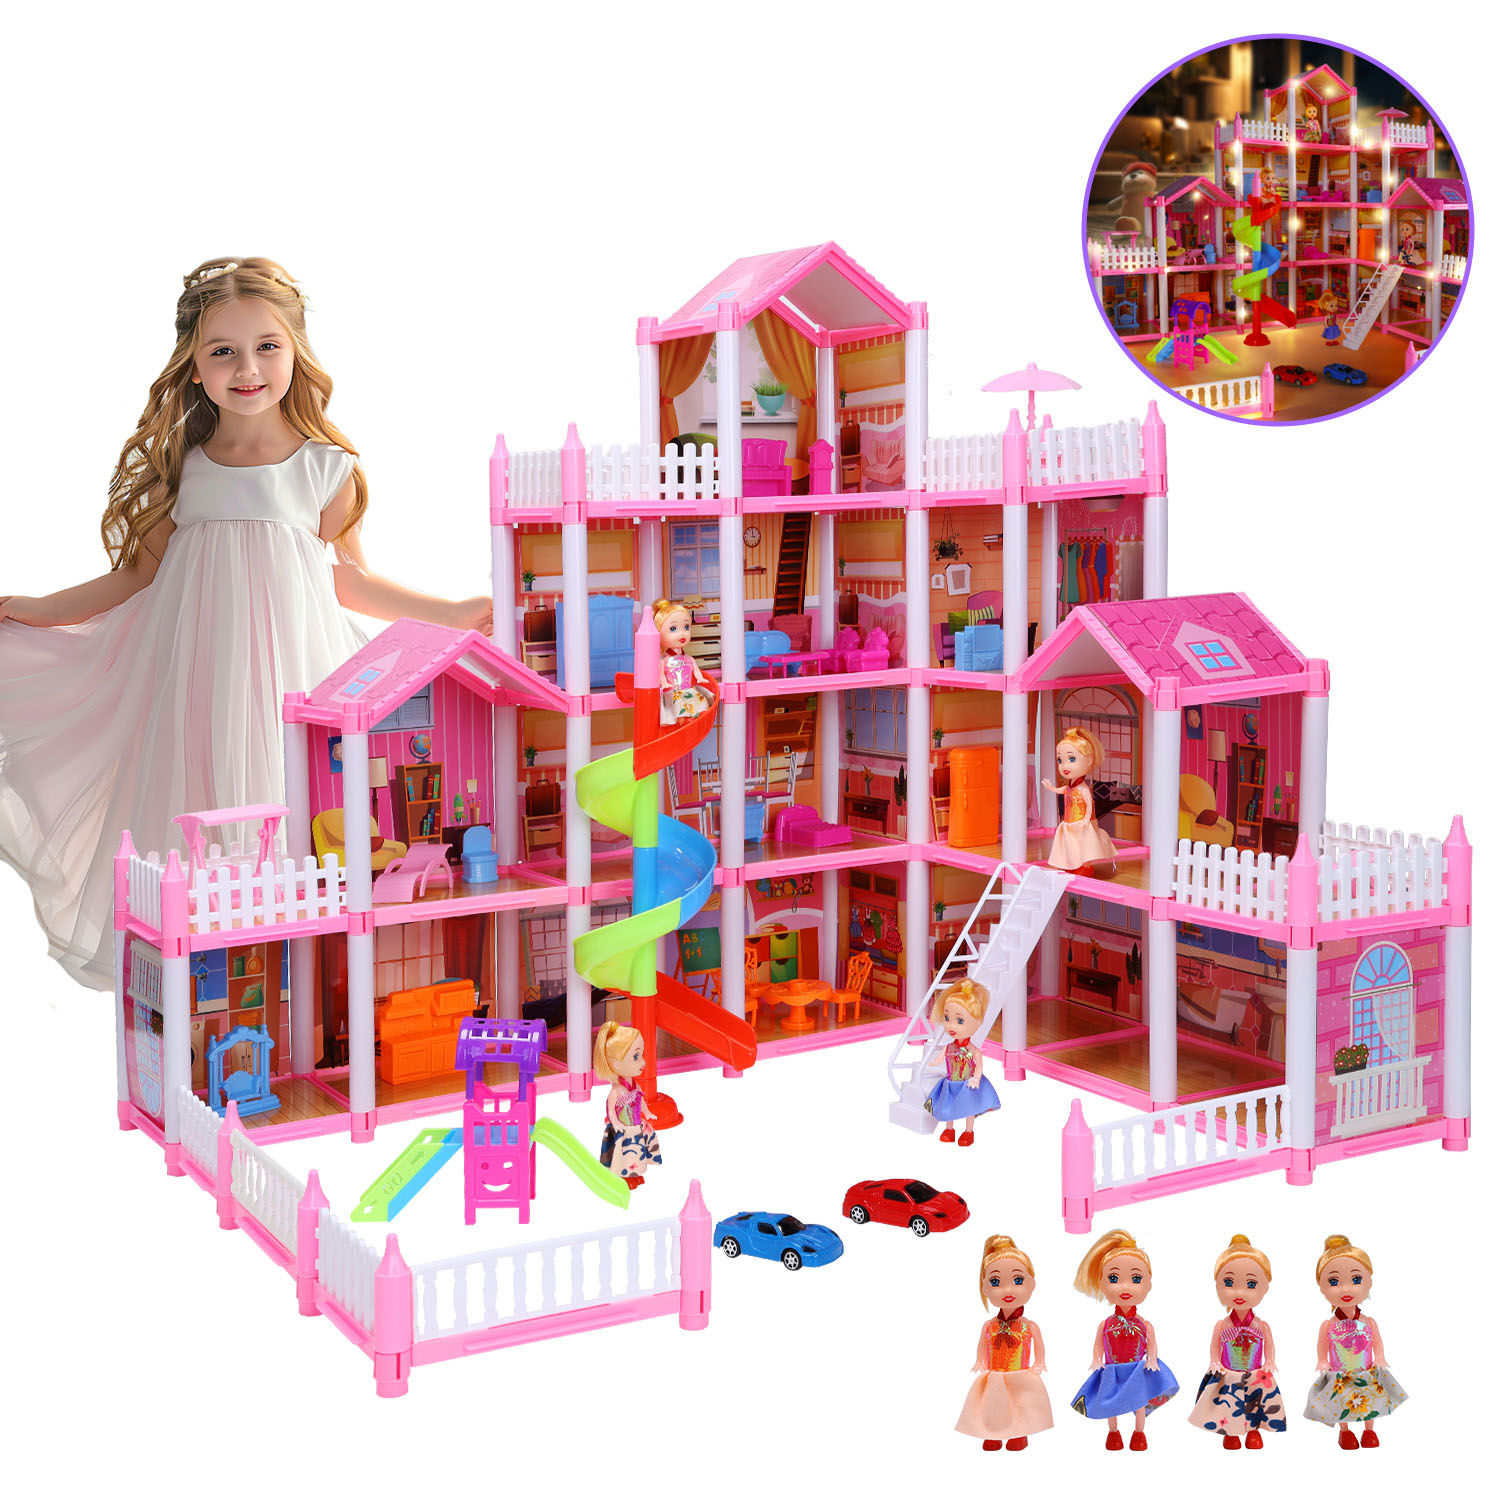 JoyStone Dream Dollhouse, 16 Rooms Playhouse with 4 Dolls Playset with Furniture&Light Strip& Rotating Slide, Gift Toy for Kids Ages 3-8 - image 1 of 9